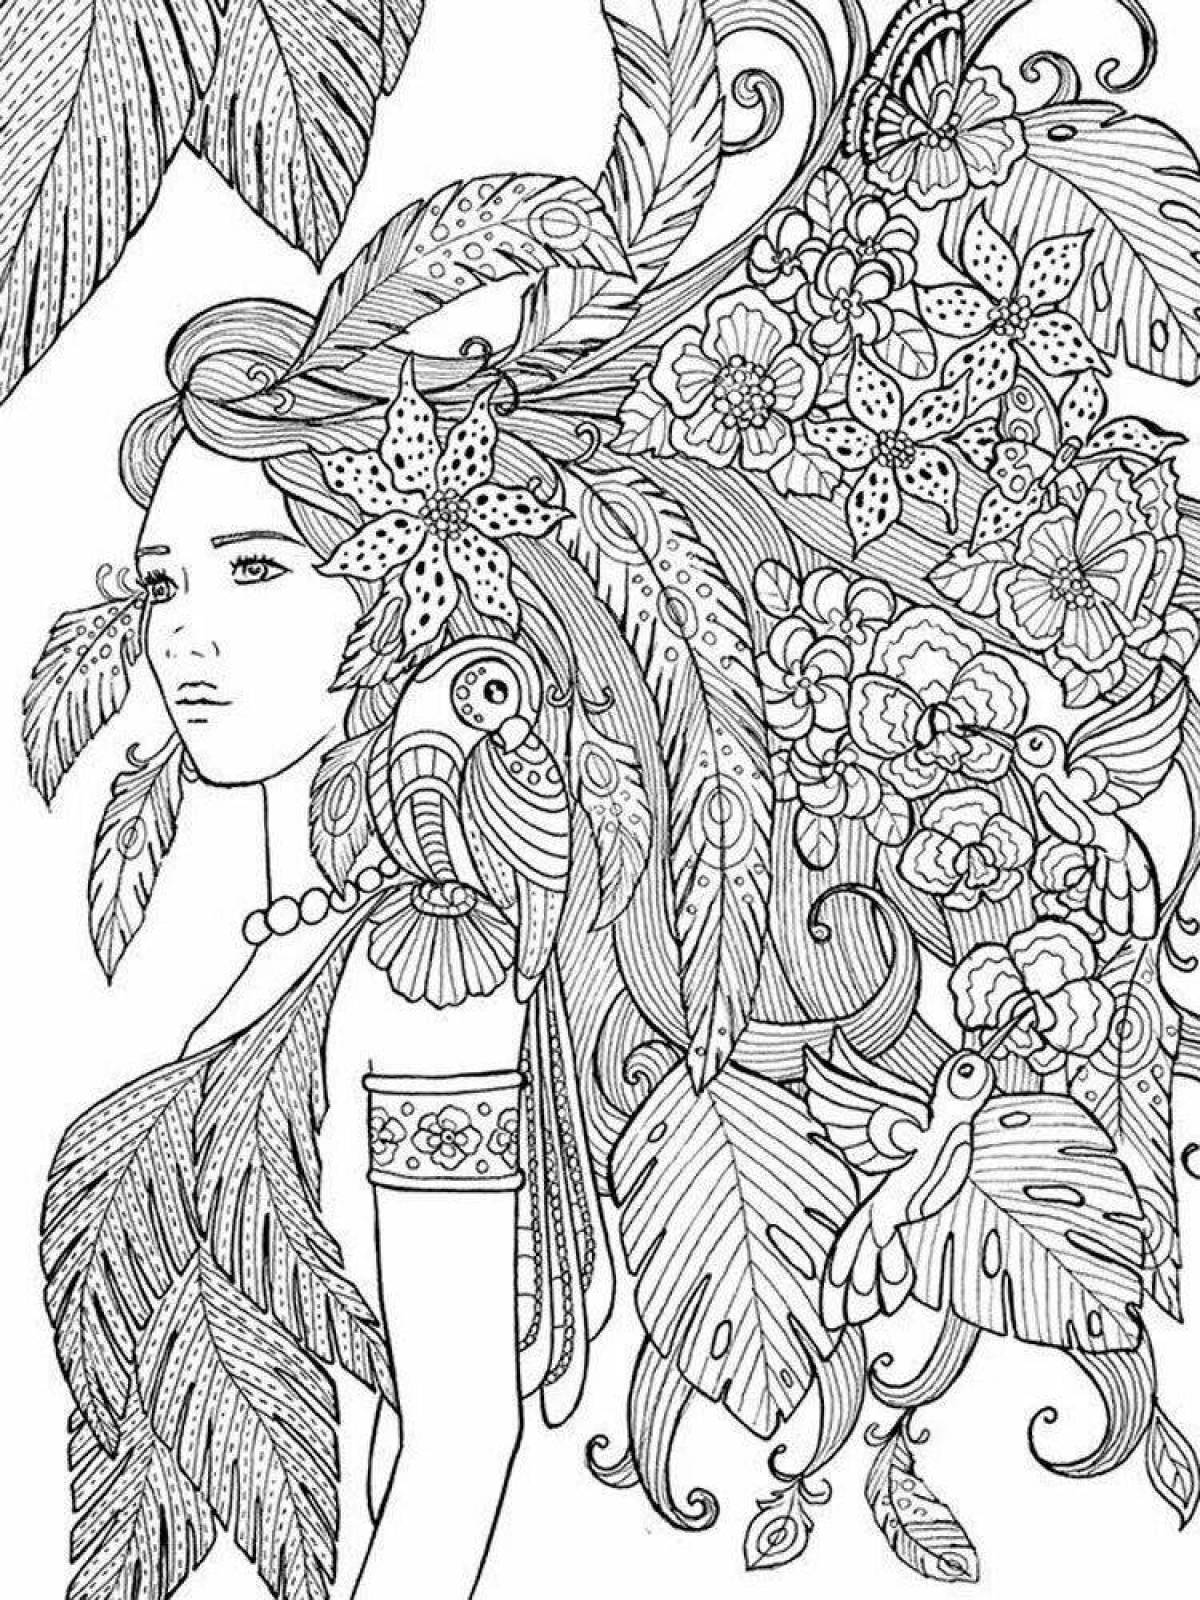 Amazing coloring pages for girls are difficult